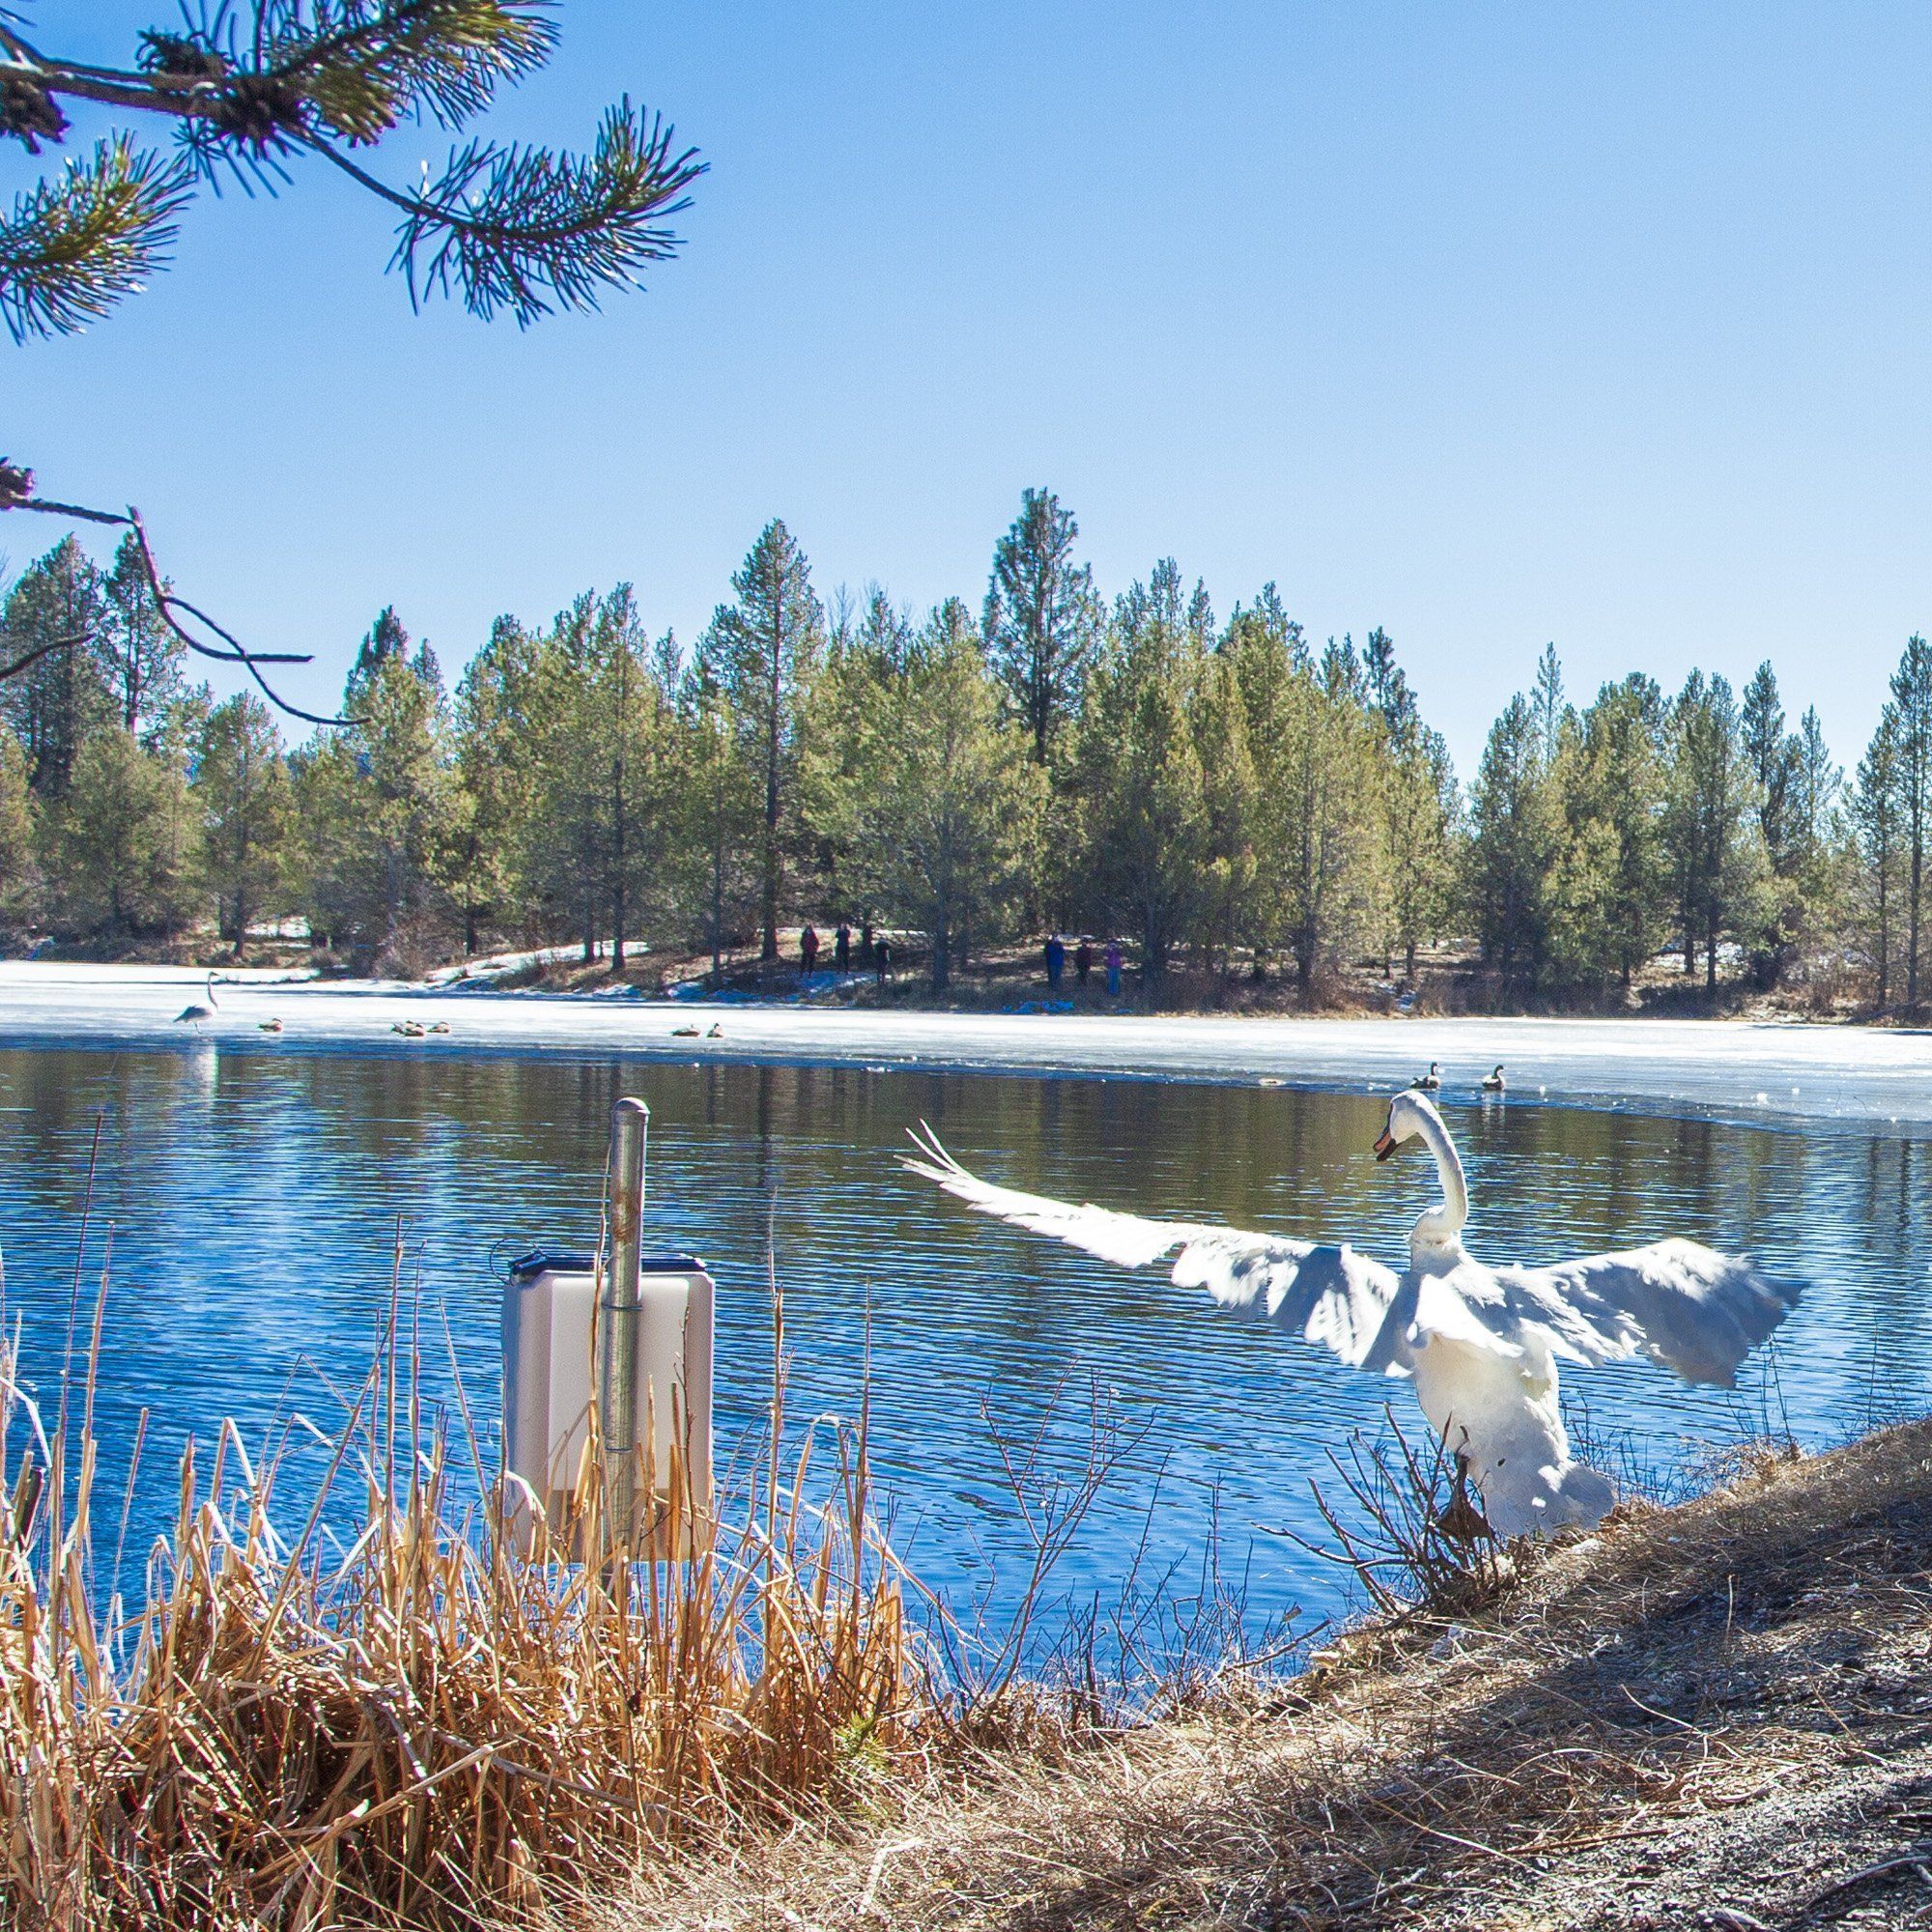 A Valentine's Day Gift: New mate introduced to Sunriver Trumpeter Swan Gus